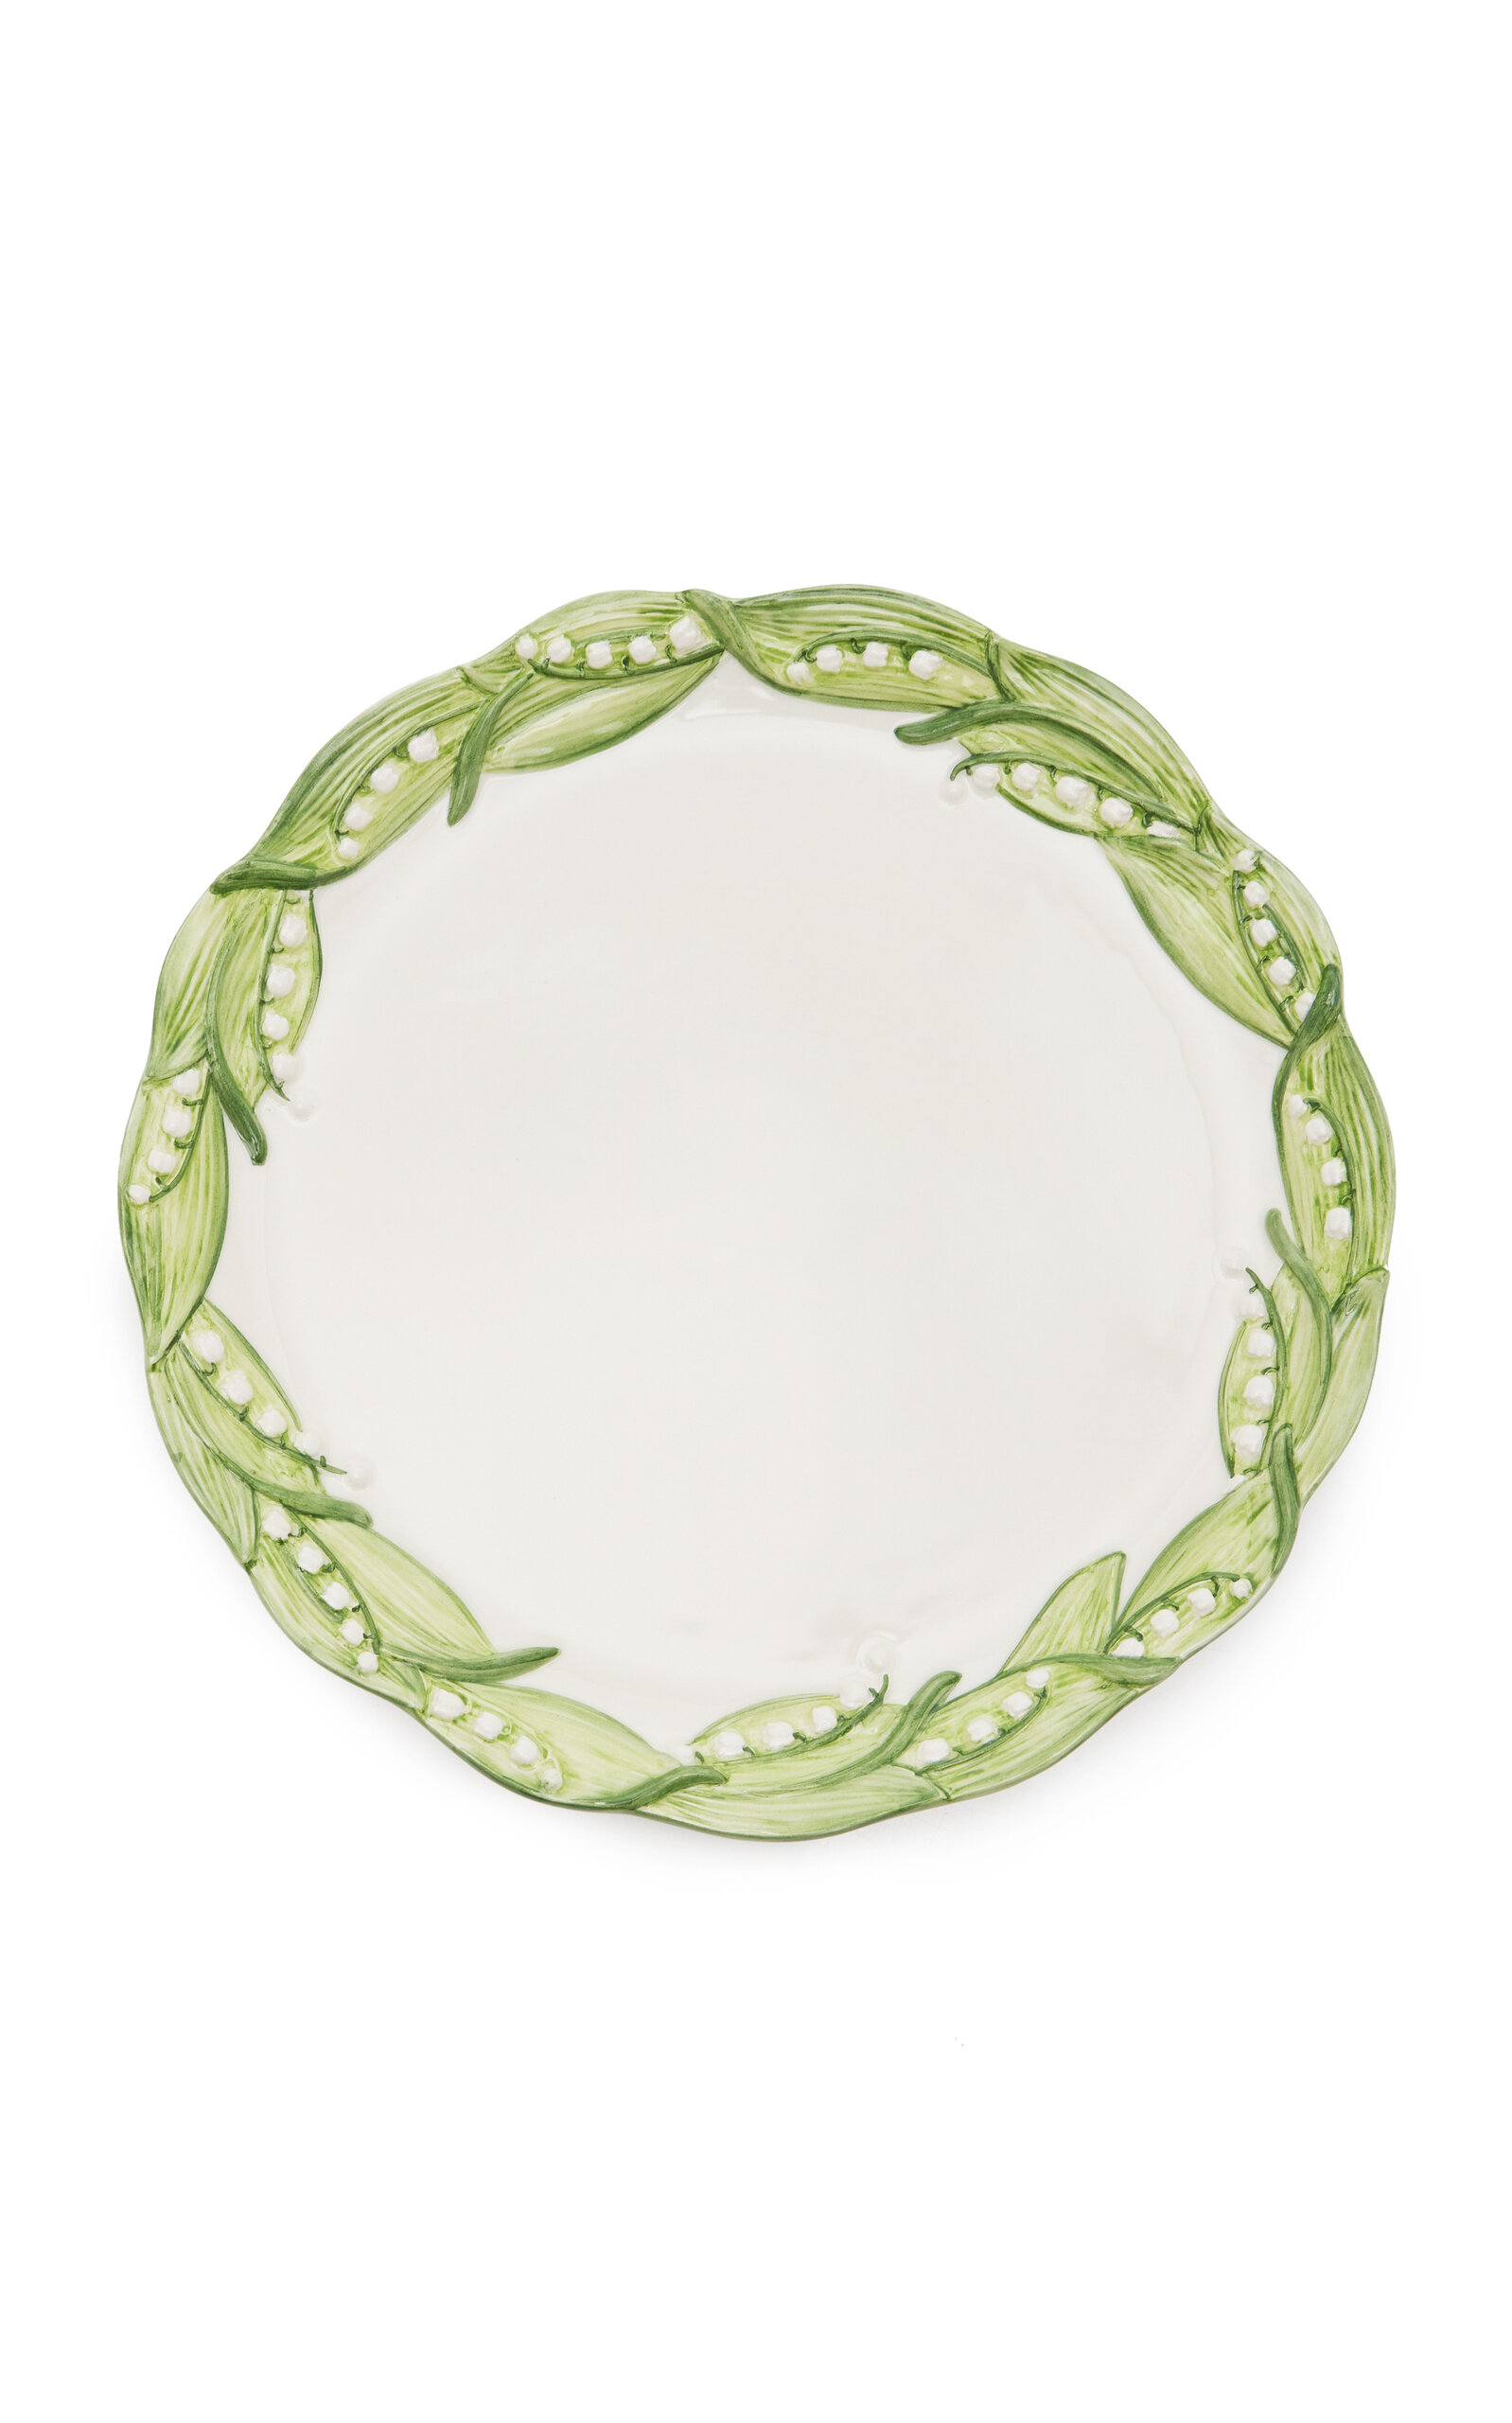 Moda Domus Lily Of The Valley Ceramic Serving Plate In Green